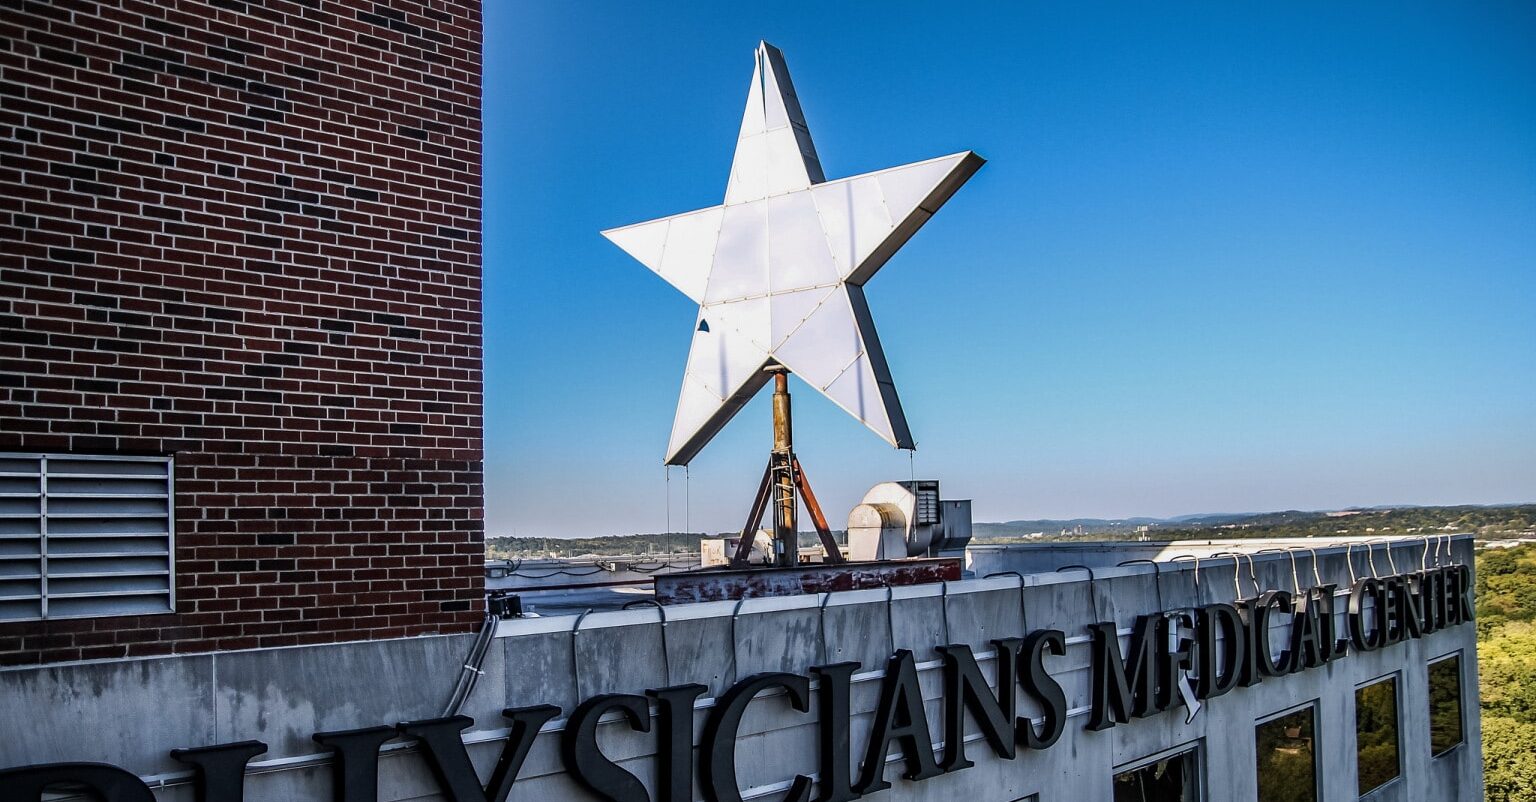 Developer to preserve iconic Carraway Star, unveils name, logo for new development